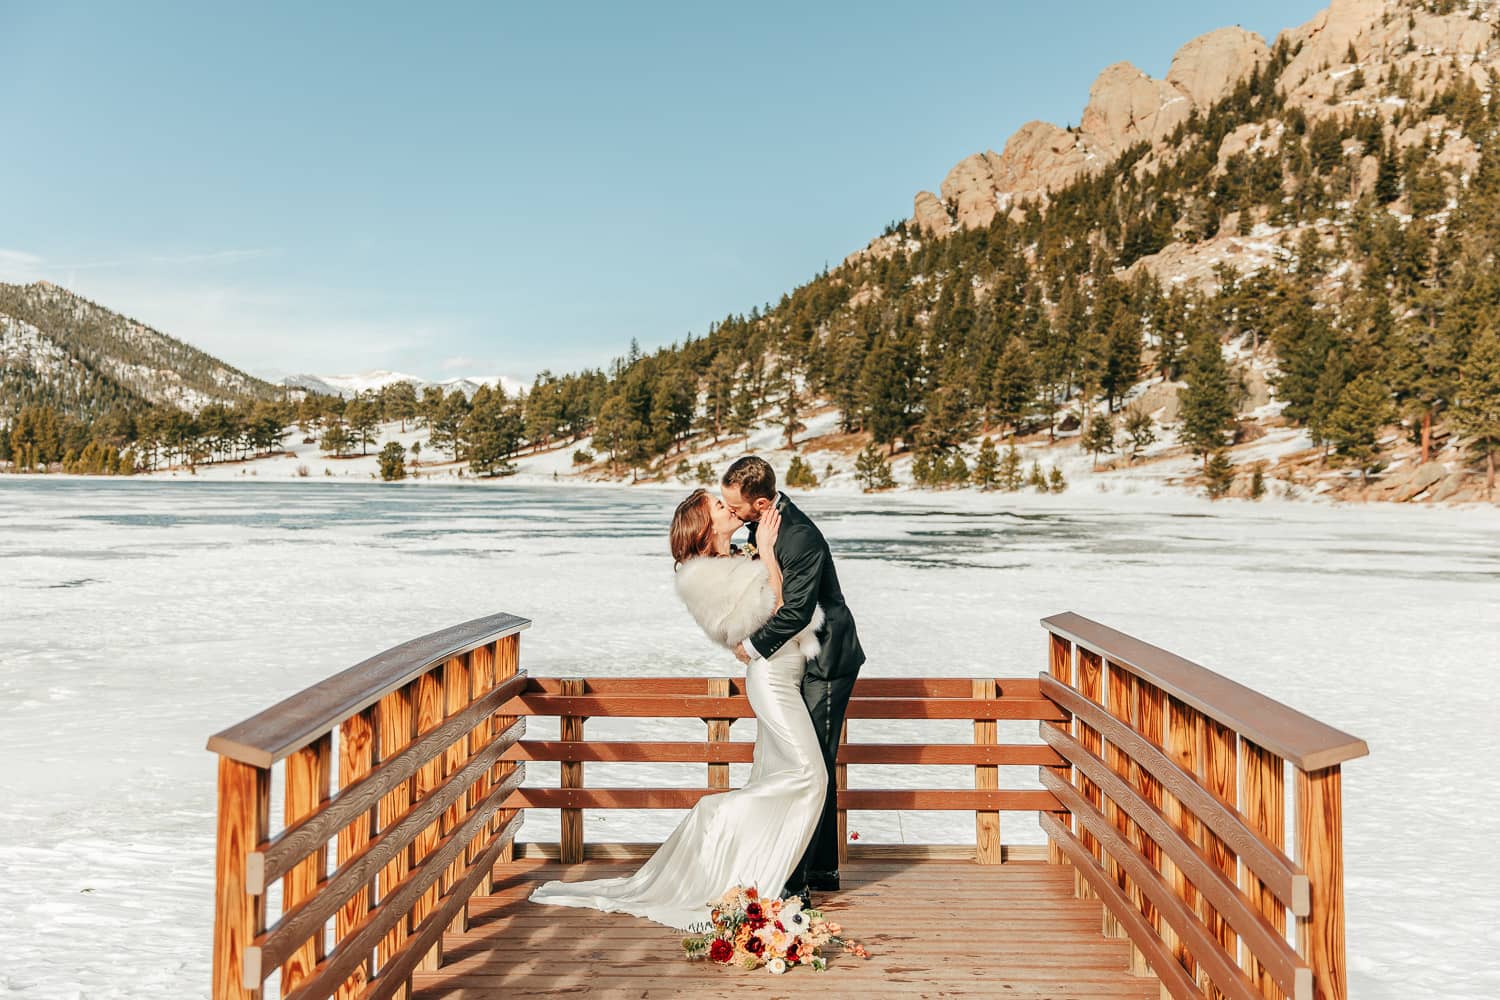 An elopement couple in wedding attire kissing on a lily lake dock in Rocky Mountain National Park.